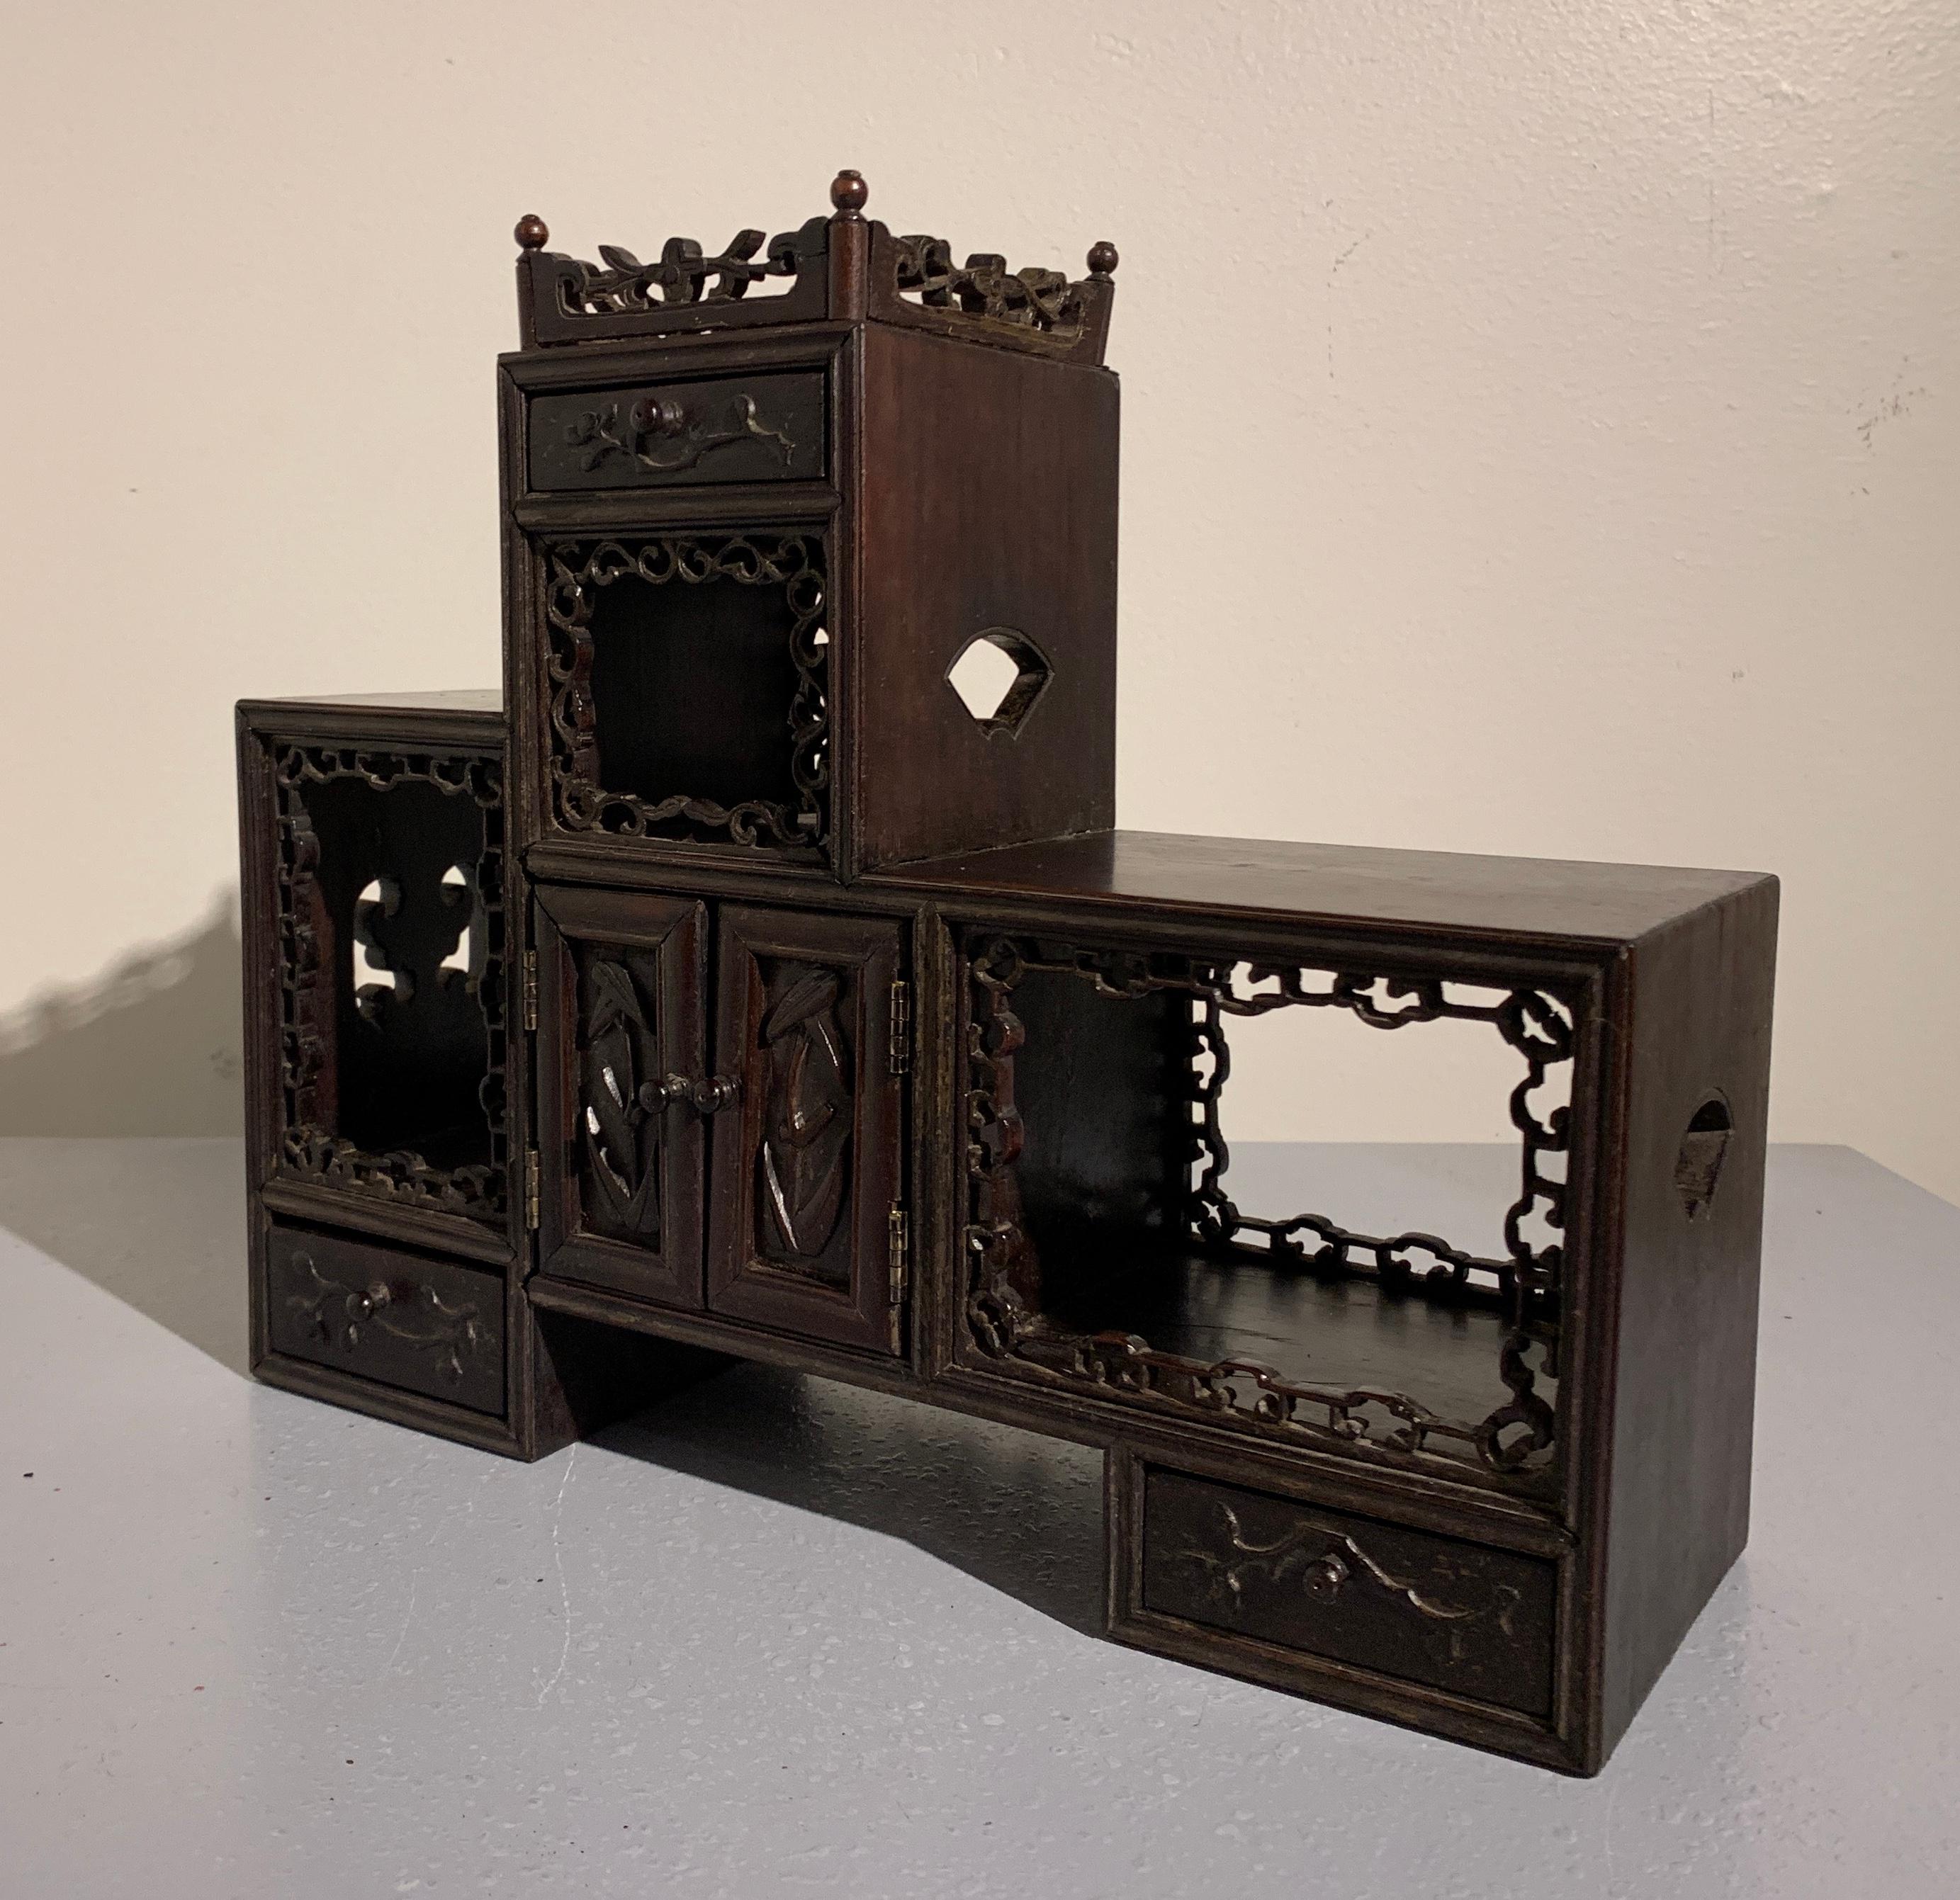 Joinery Chinese Late Qing Dynasty Hardwood Miniature Display Cabinet, Doubaoge